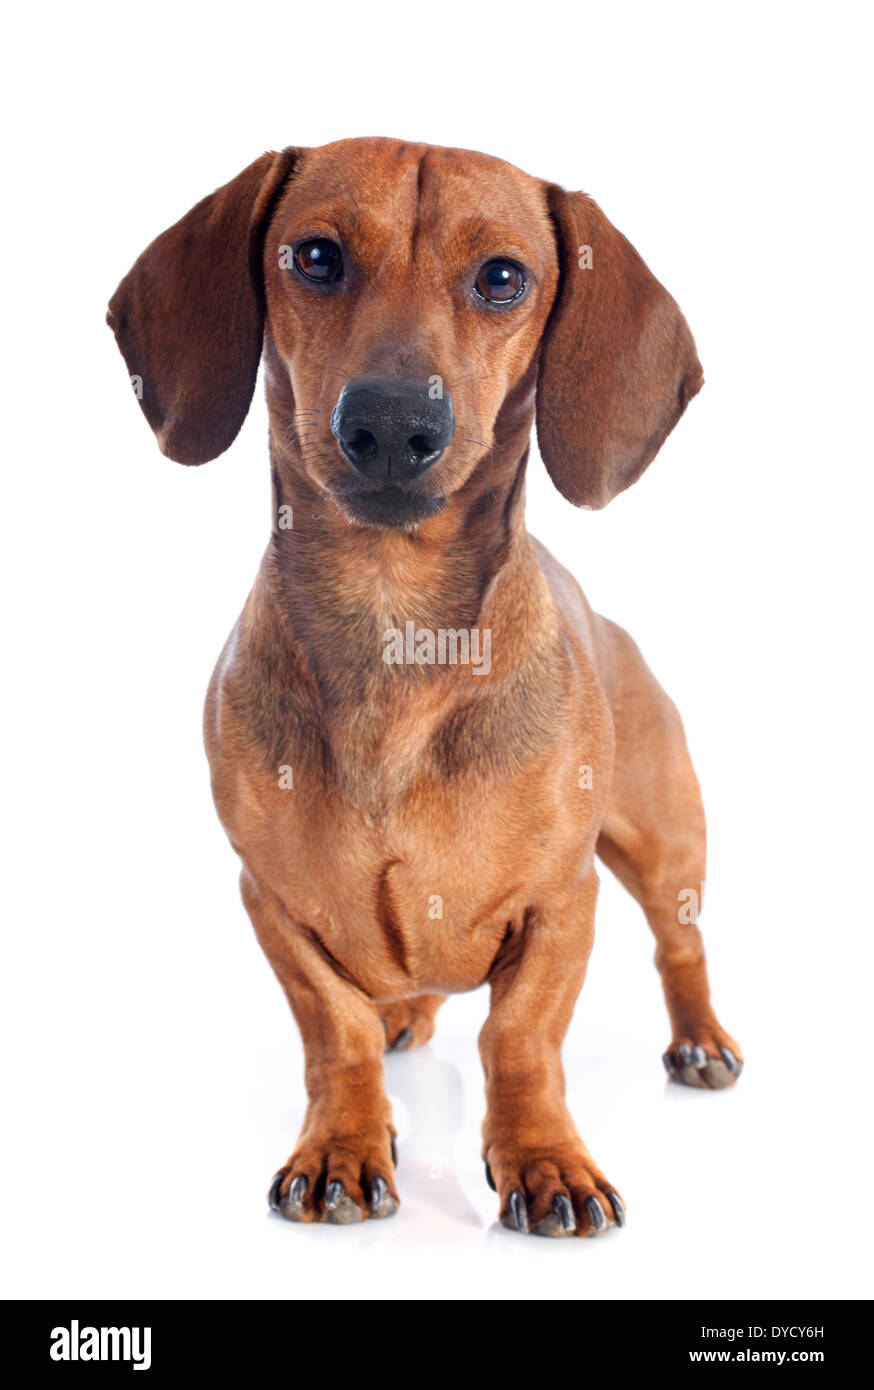 Dachshund dog in front of white background Banque D'Images